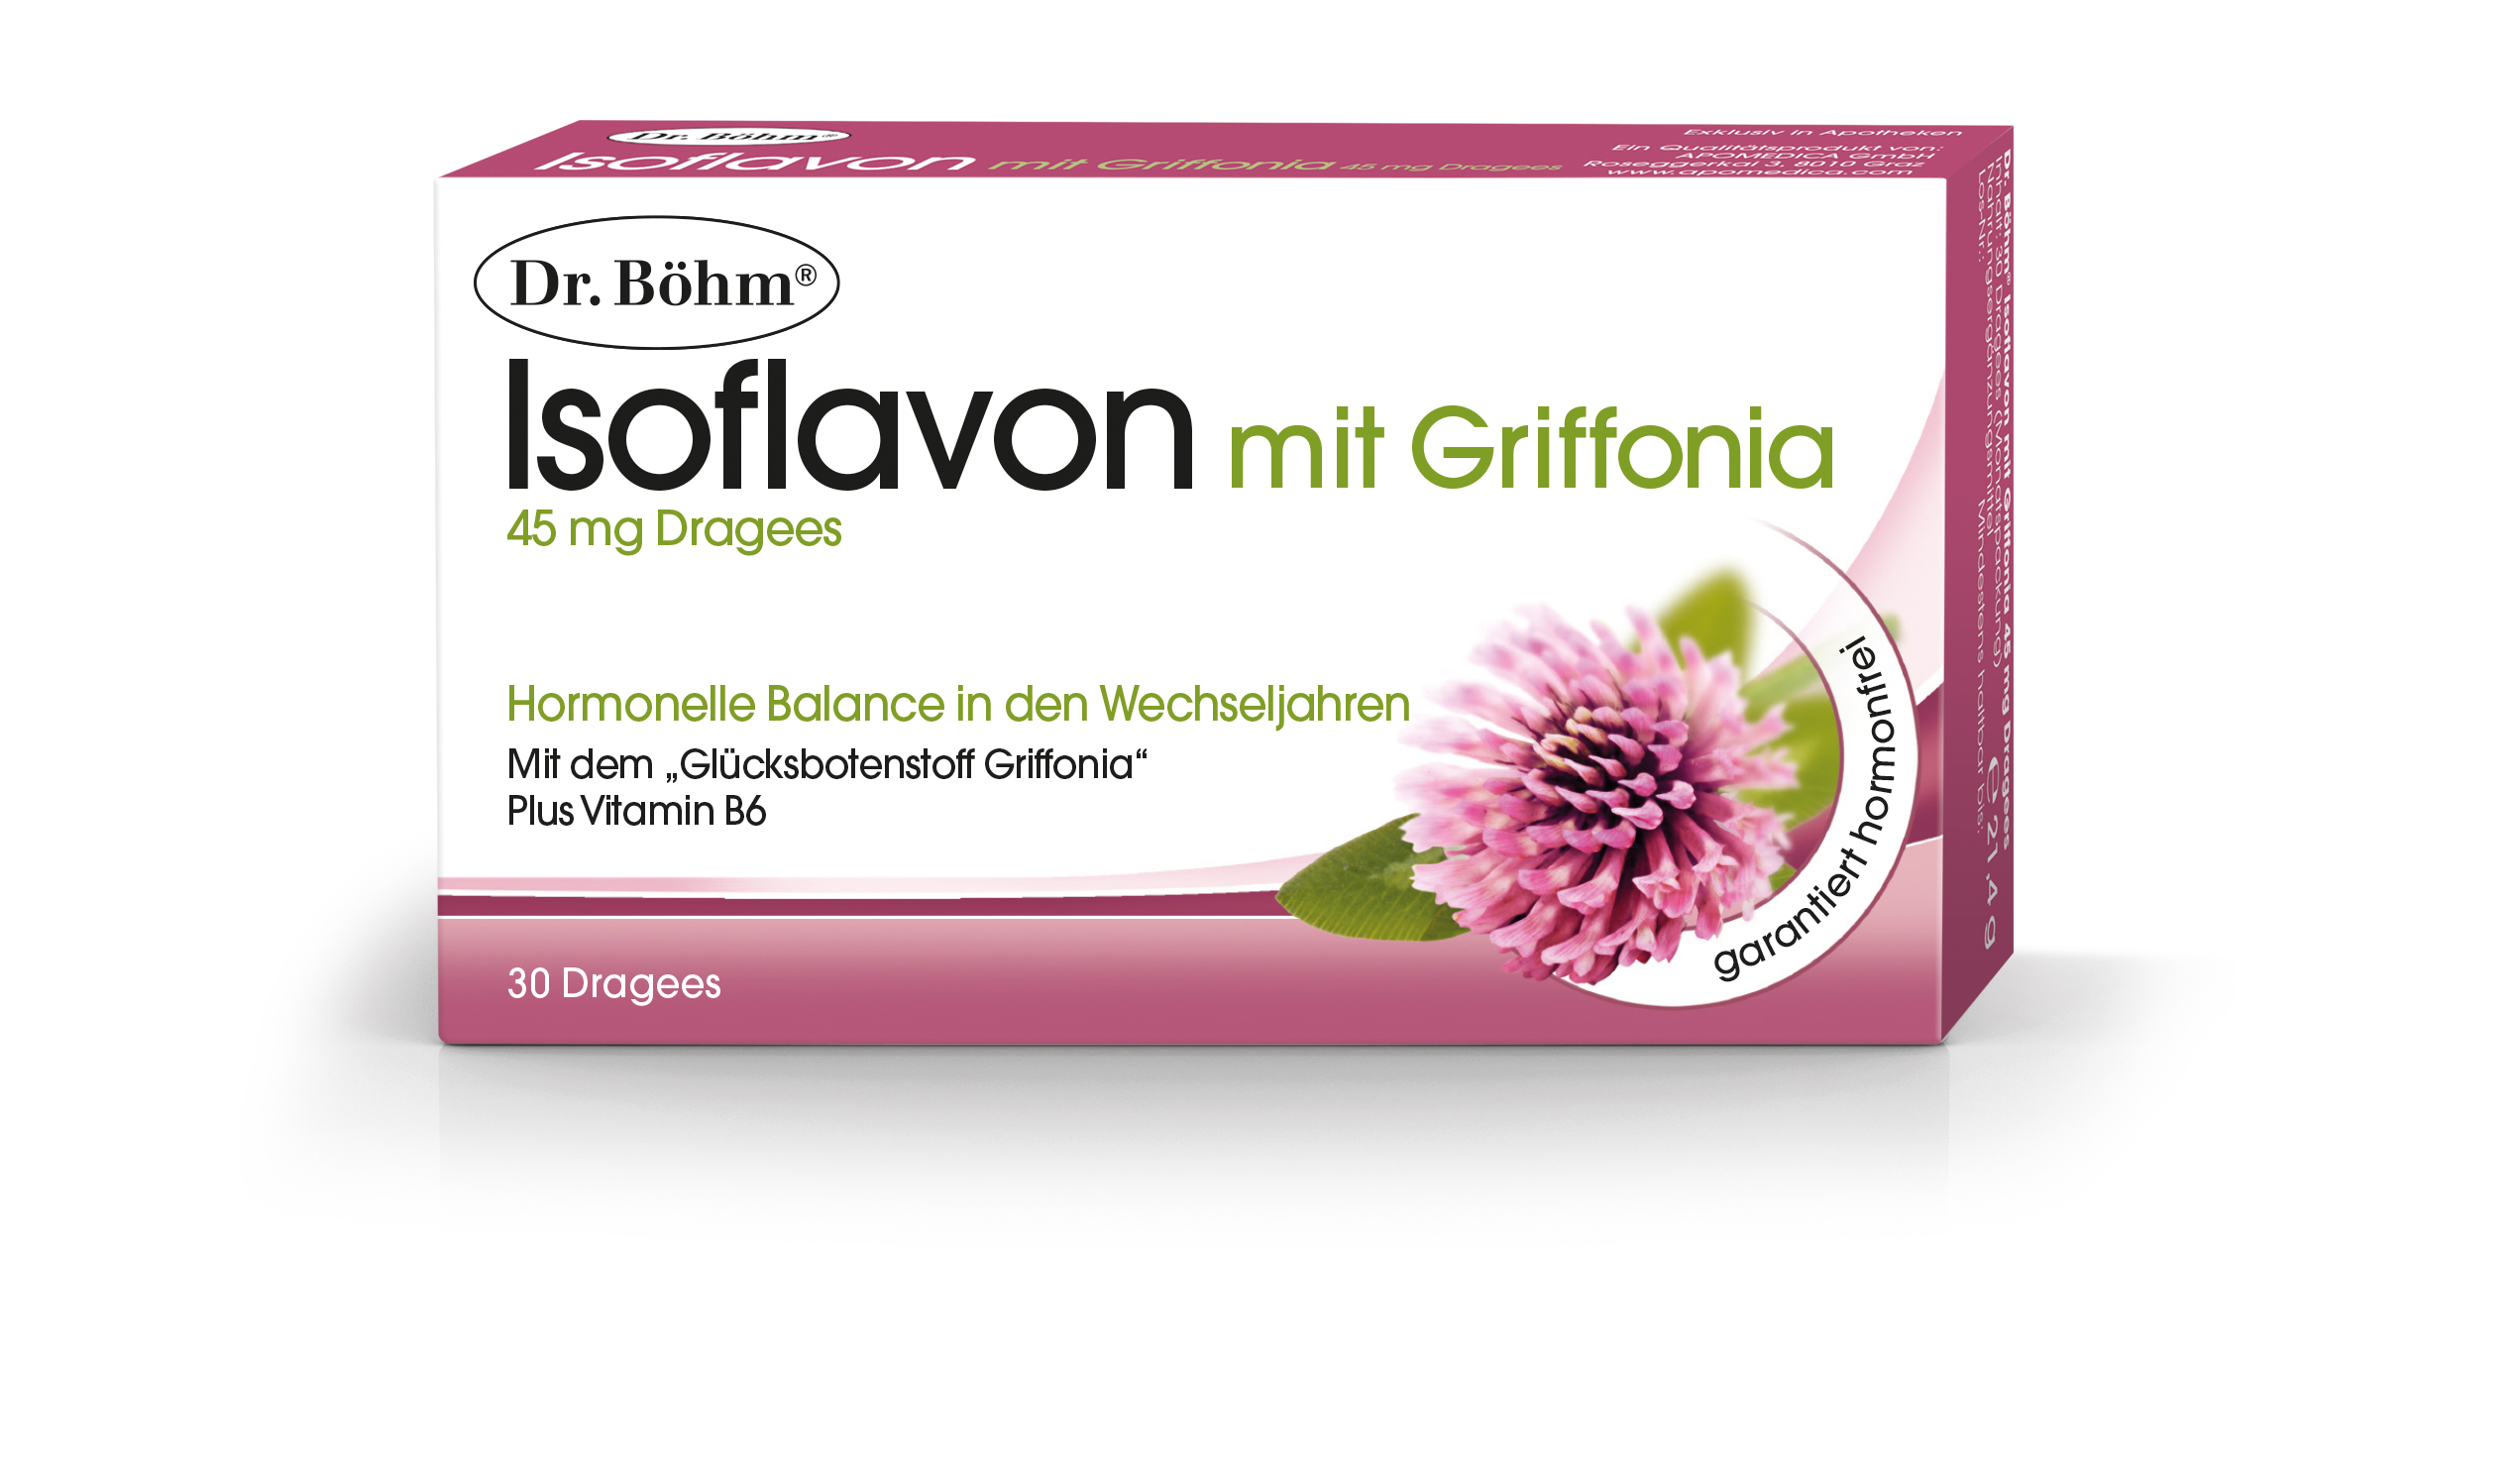 Dr. Böhm Isoflavon mit Griffonia 45 mg Dragees